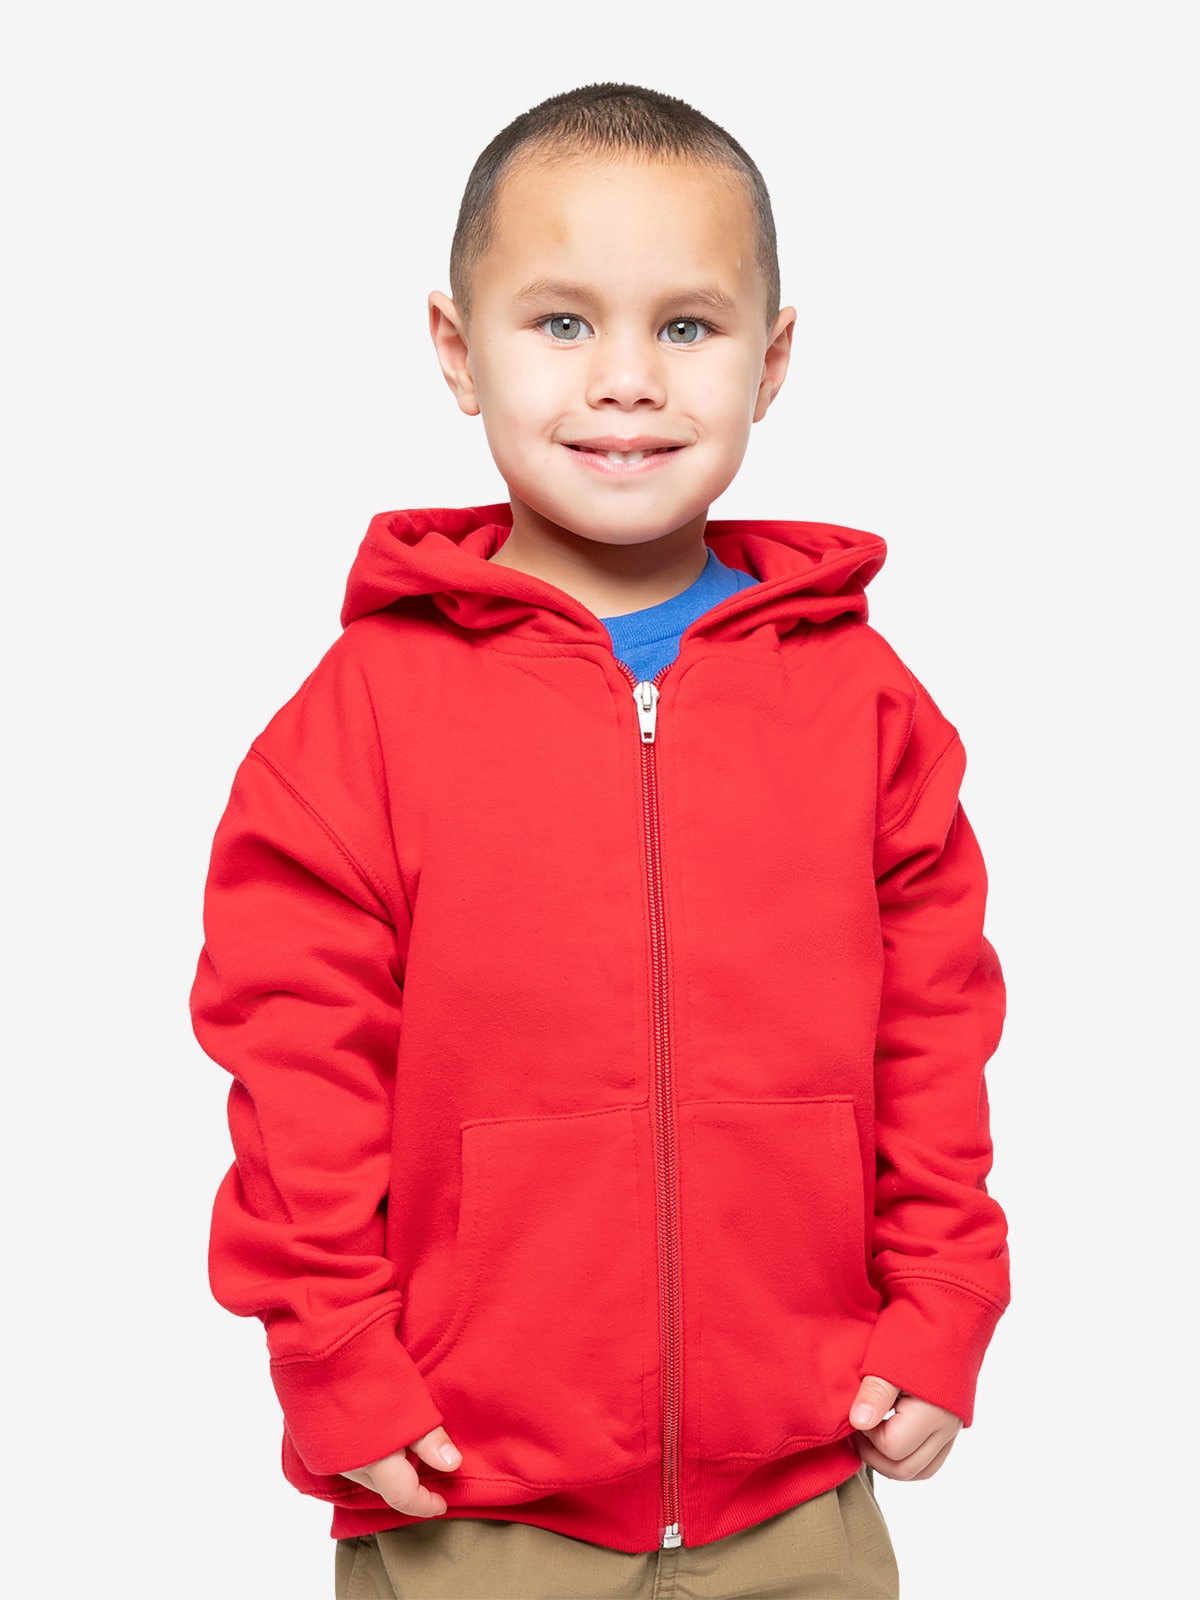 Toddler Insect Shield Zip Hoody